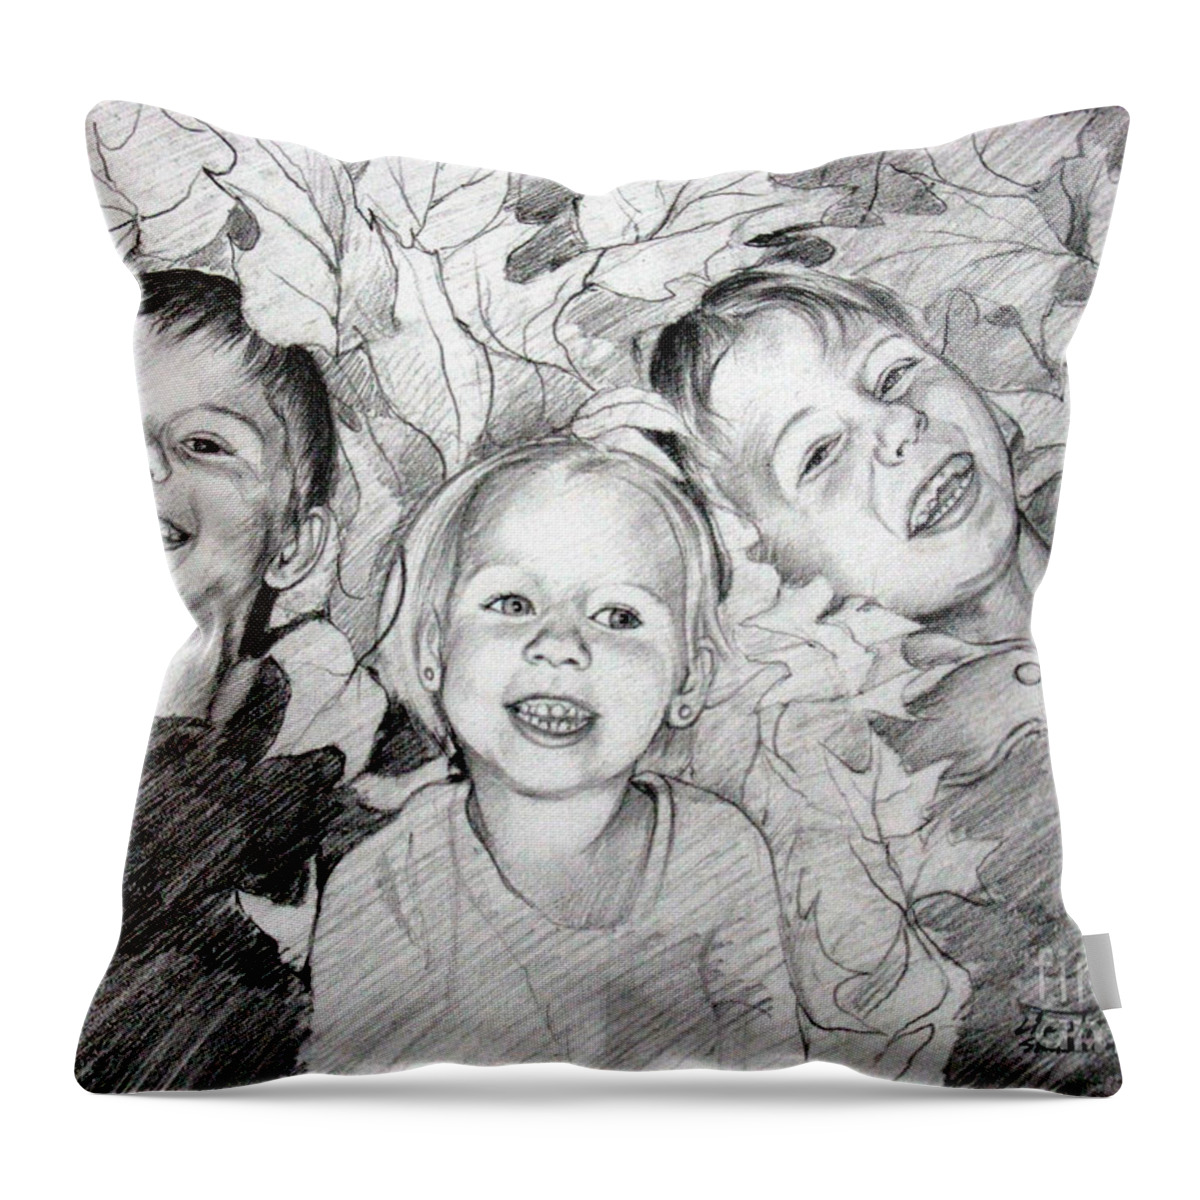 Children Throw Pillow featuring the drawing Children playing in the fallen leaves by Christopher Shellhammer